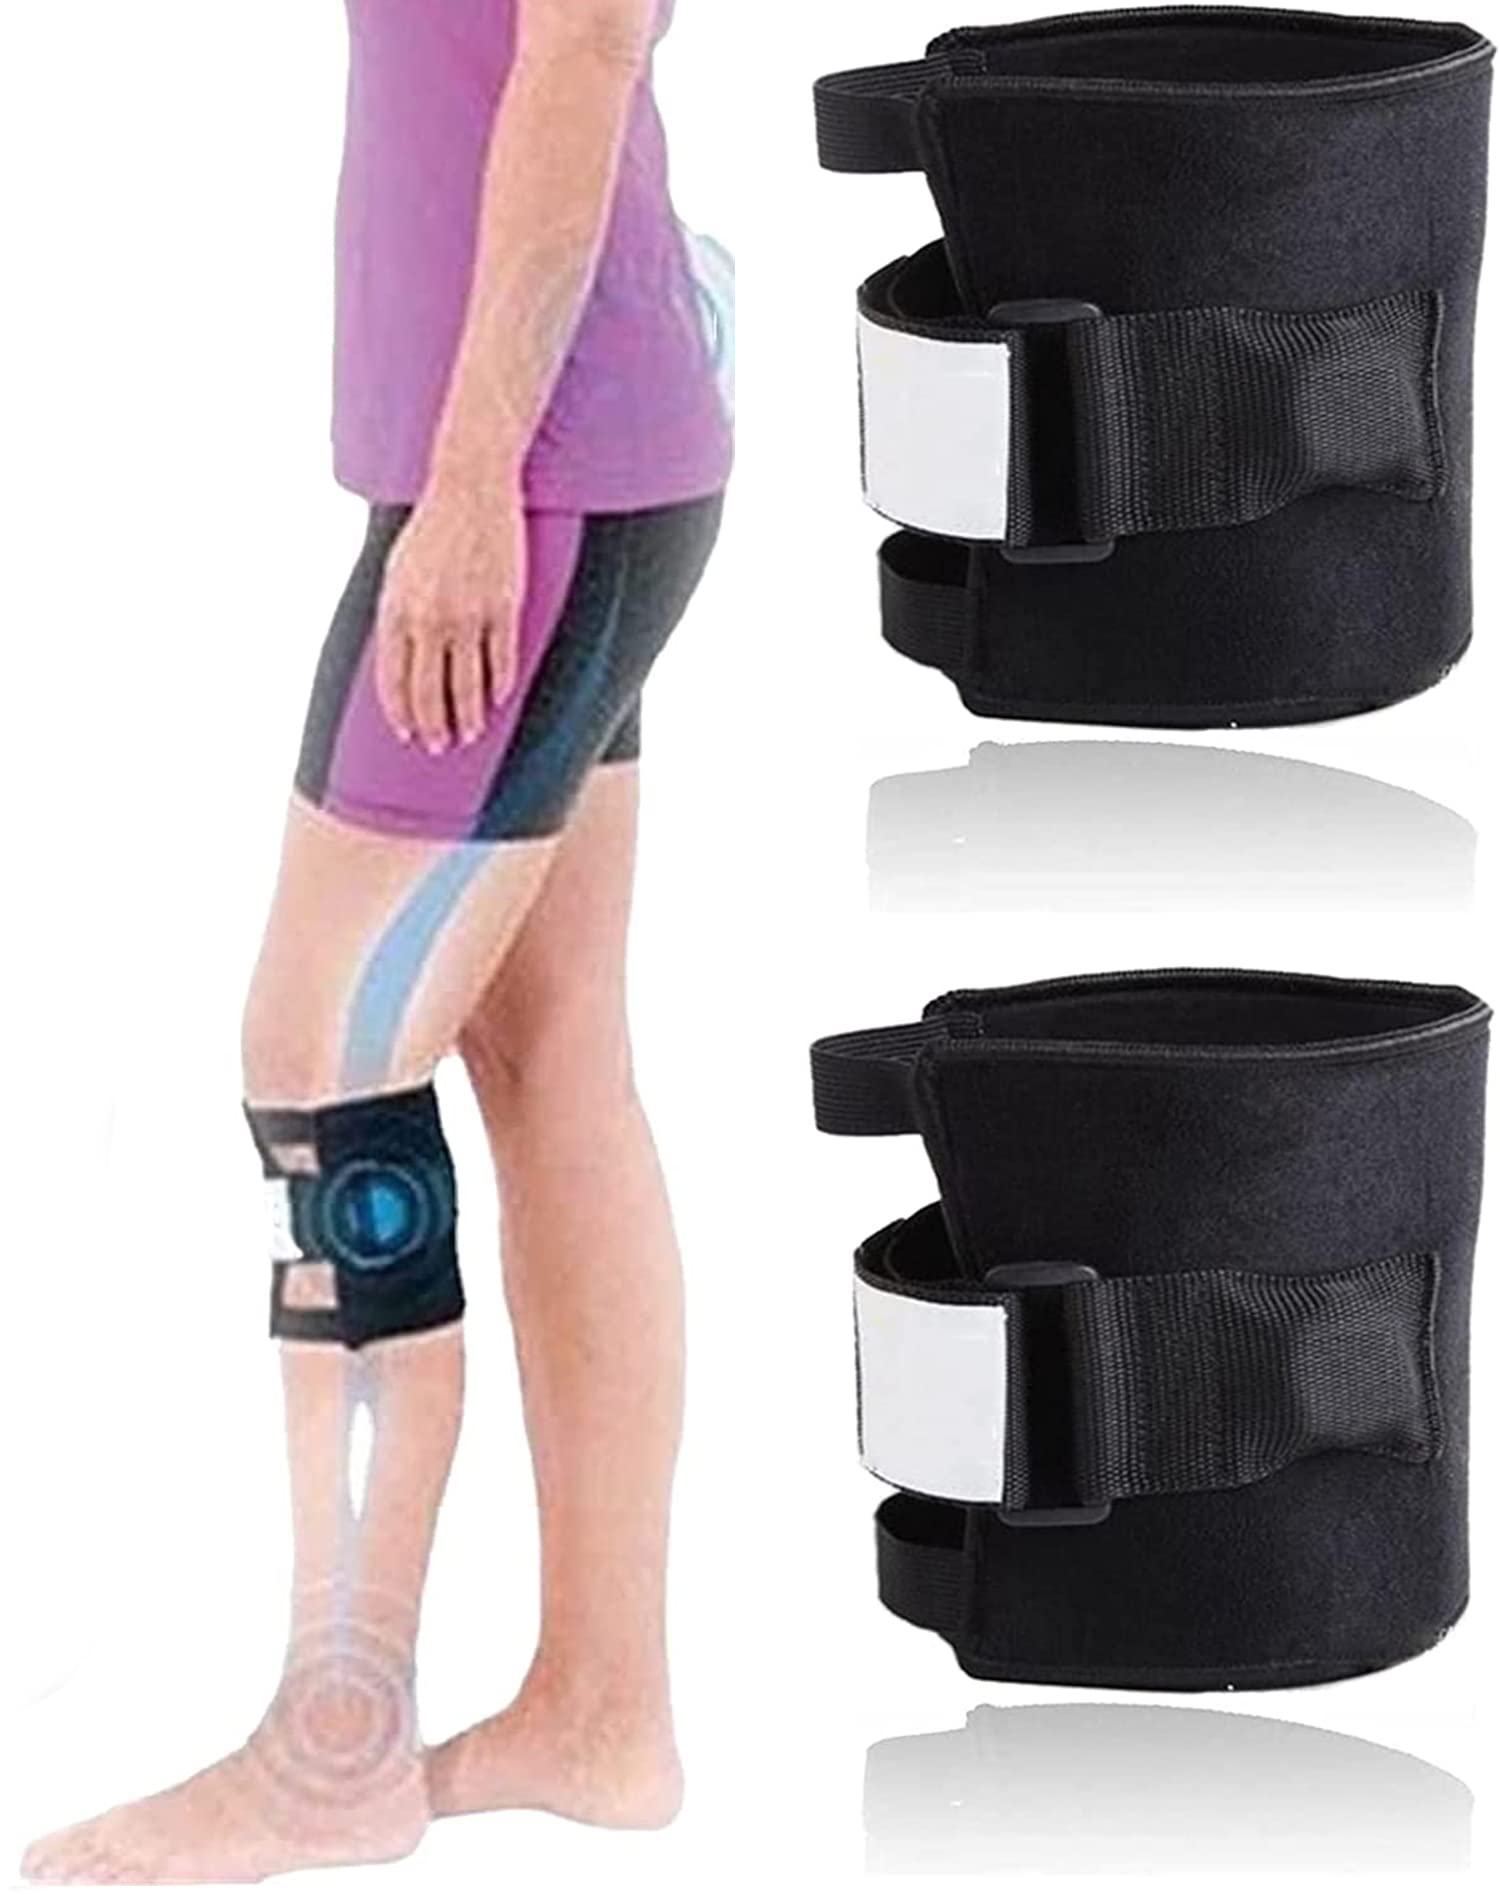 2pcs Sciatica Pain Relief Devices,Pressure Point Brace Relieve Acupressure Leg Sciatica, Magnetic Therapy Self Heating Knee Support Wraps Pain Relief, Sciatic Nerve Brace For Knee Pain, Fit For Men & Women